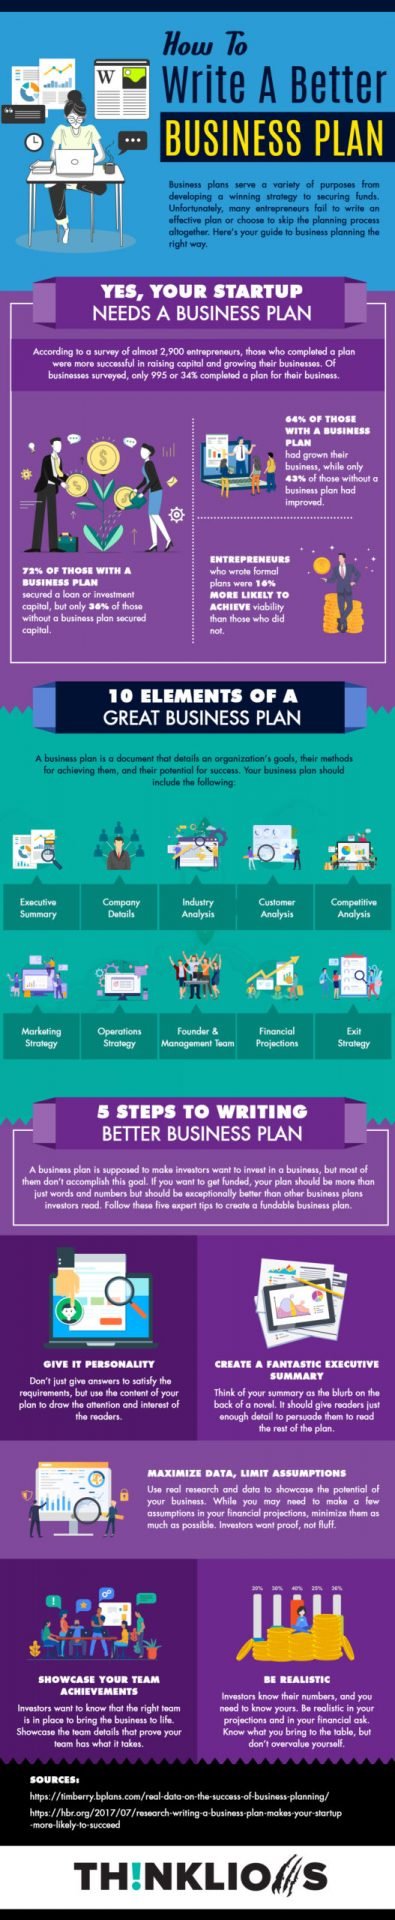 writing better app business plans infographic